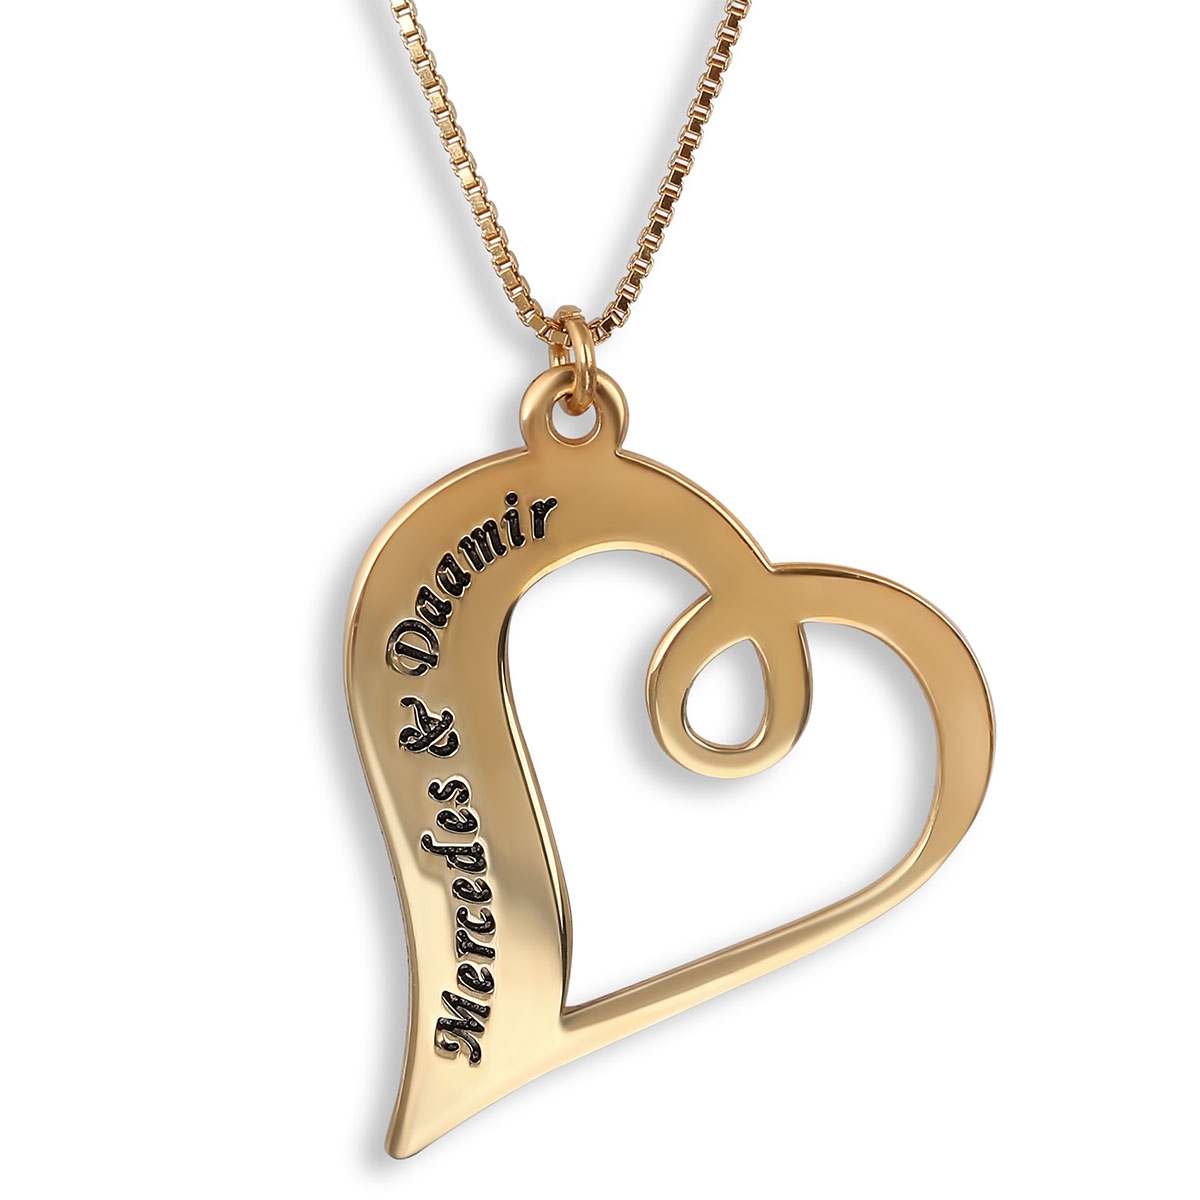 24K Gold-Plated Heart Double Name Customizable Necklace (Hebrew/English)  - 1